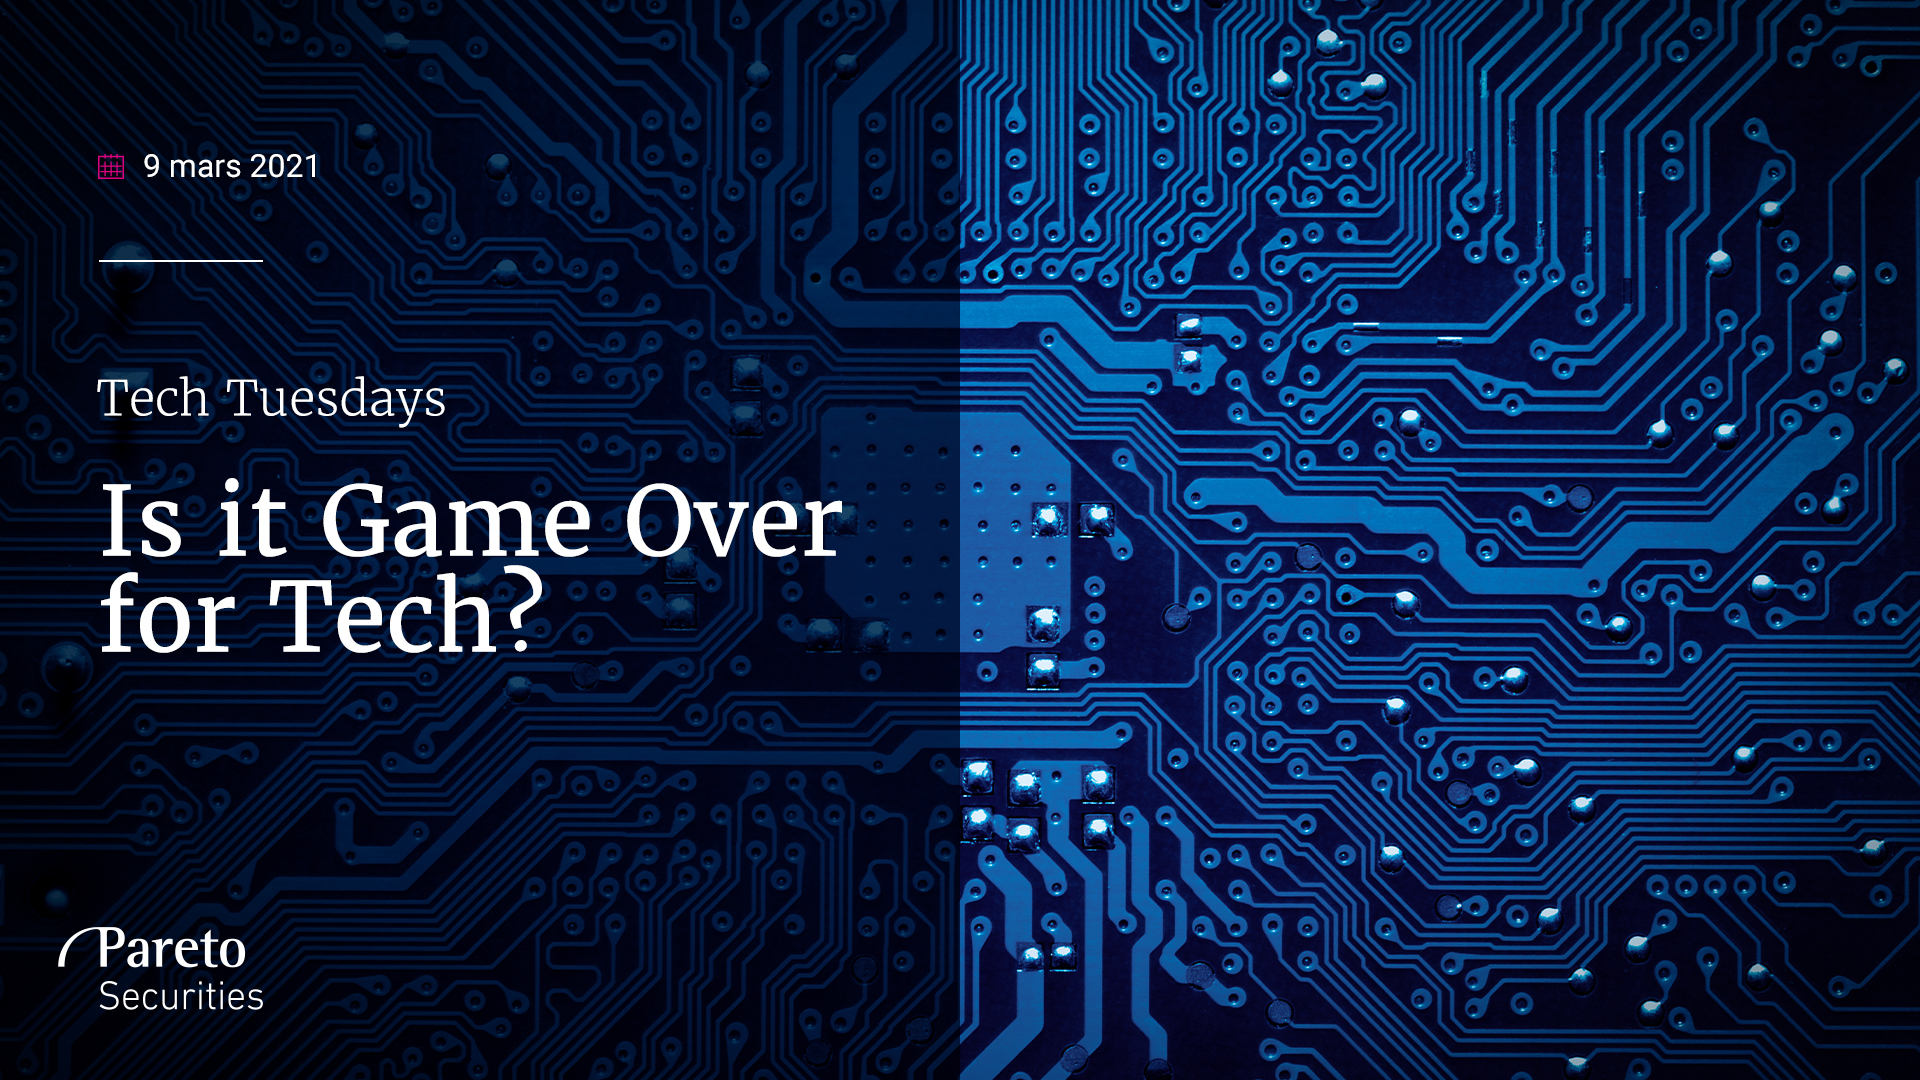 Tech Tuesday del 2: Game over for Tech?